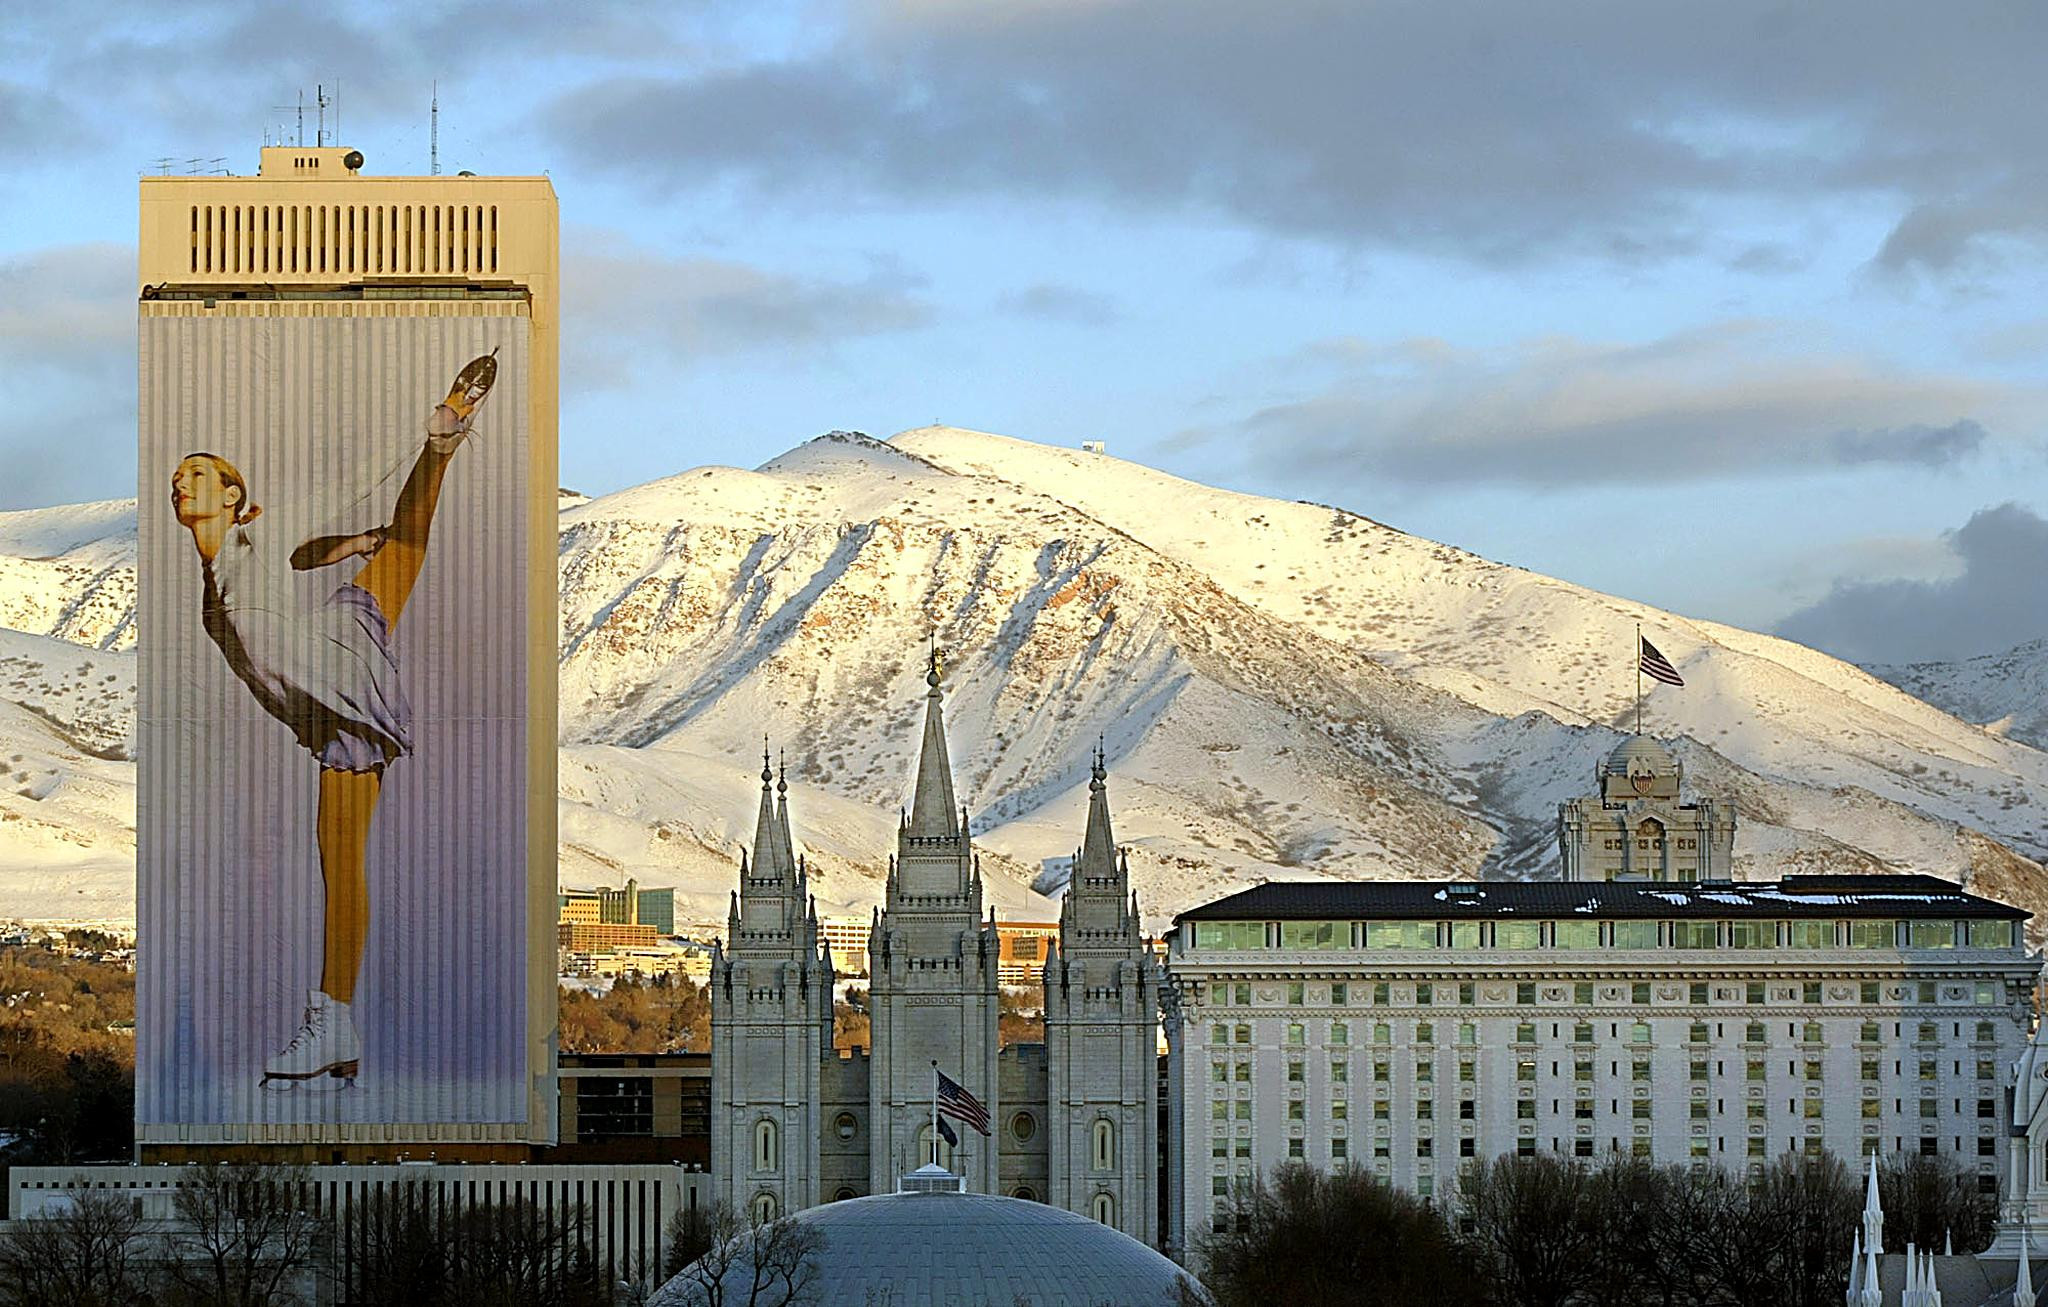 Salt Lake City hosted a successful 2002 Winter Olympic Games, despite a major bribery scandal and a difficult security situation following 9/11 ©Getty Images